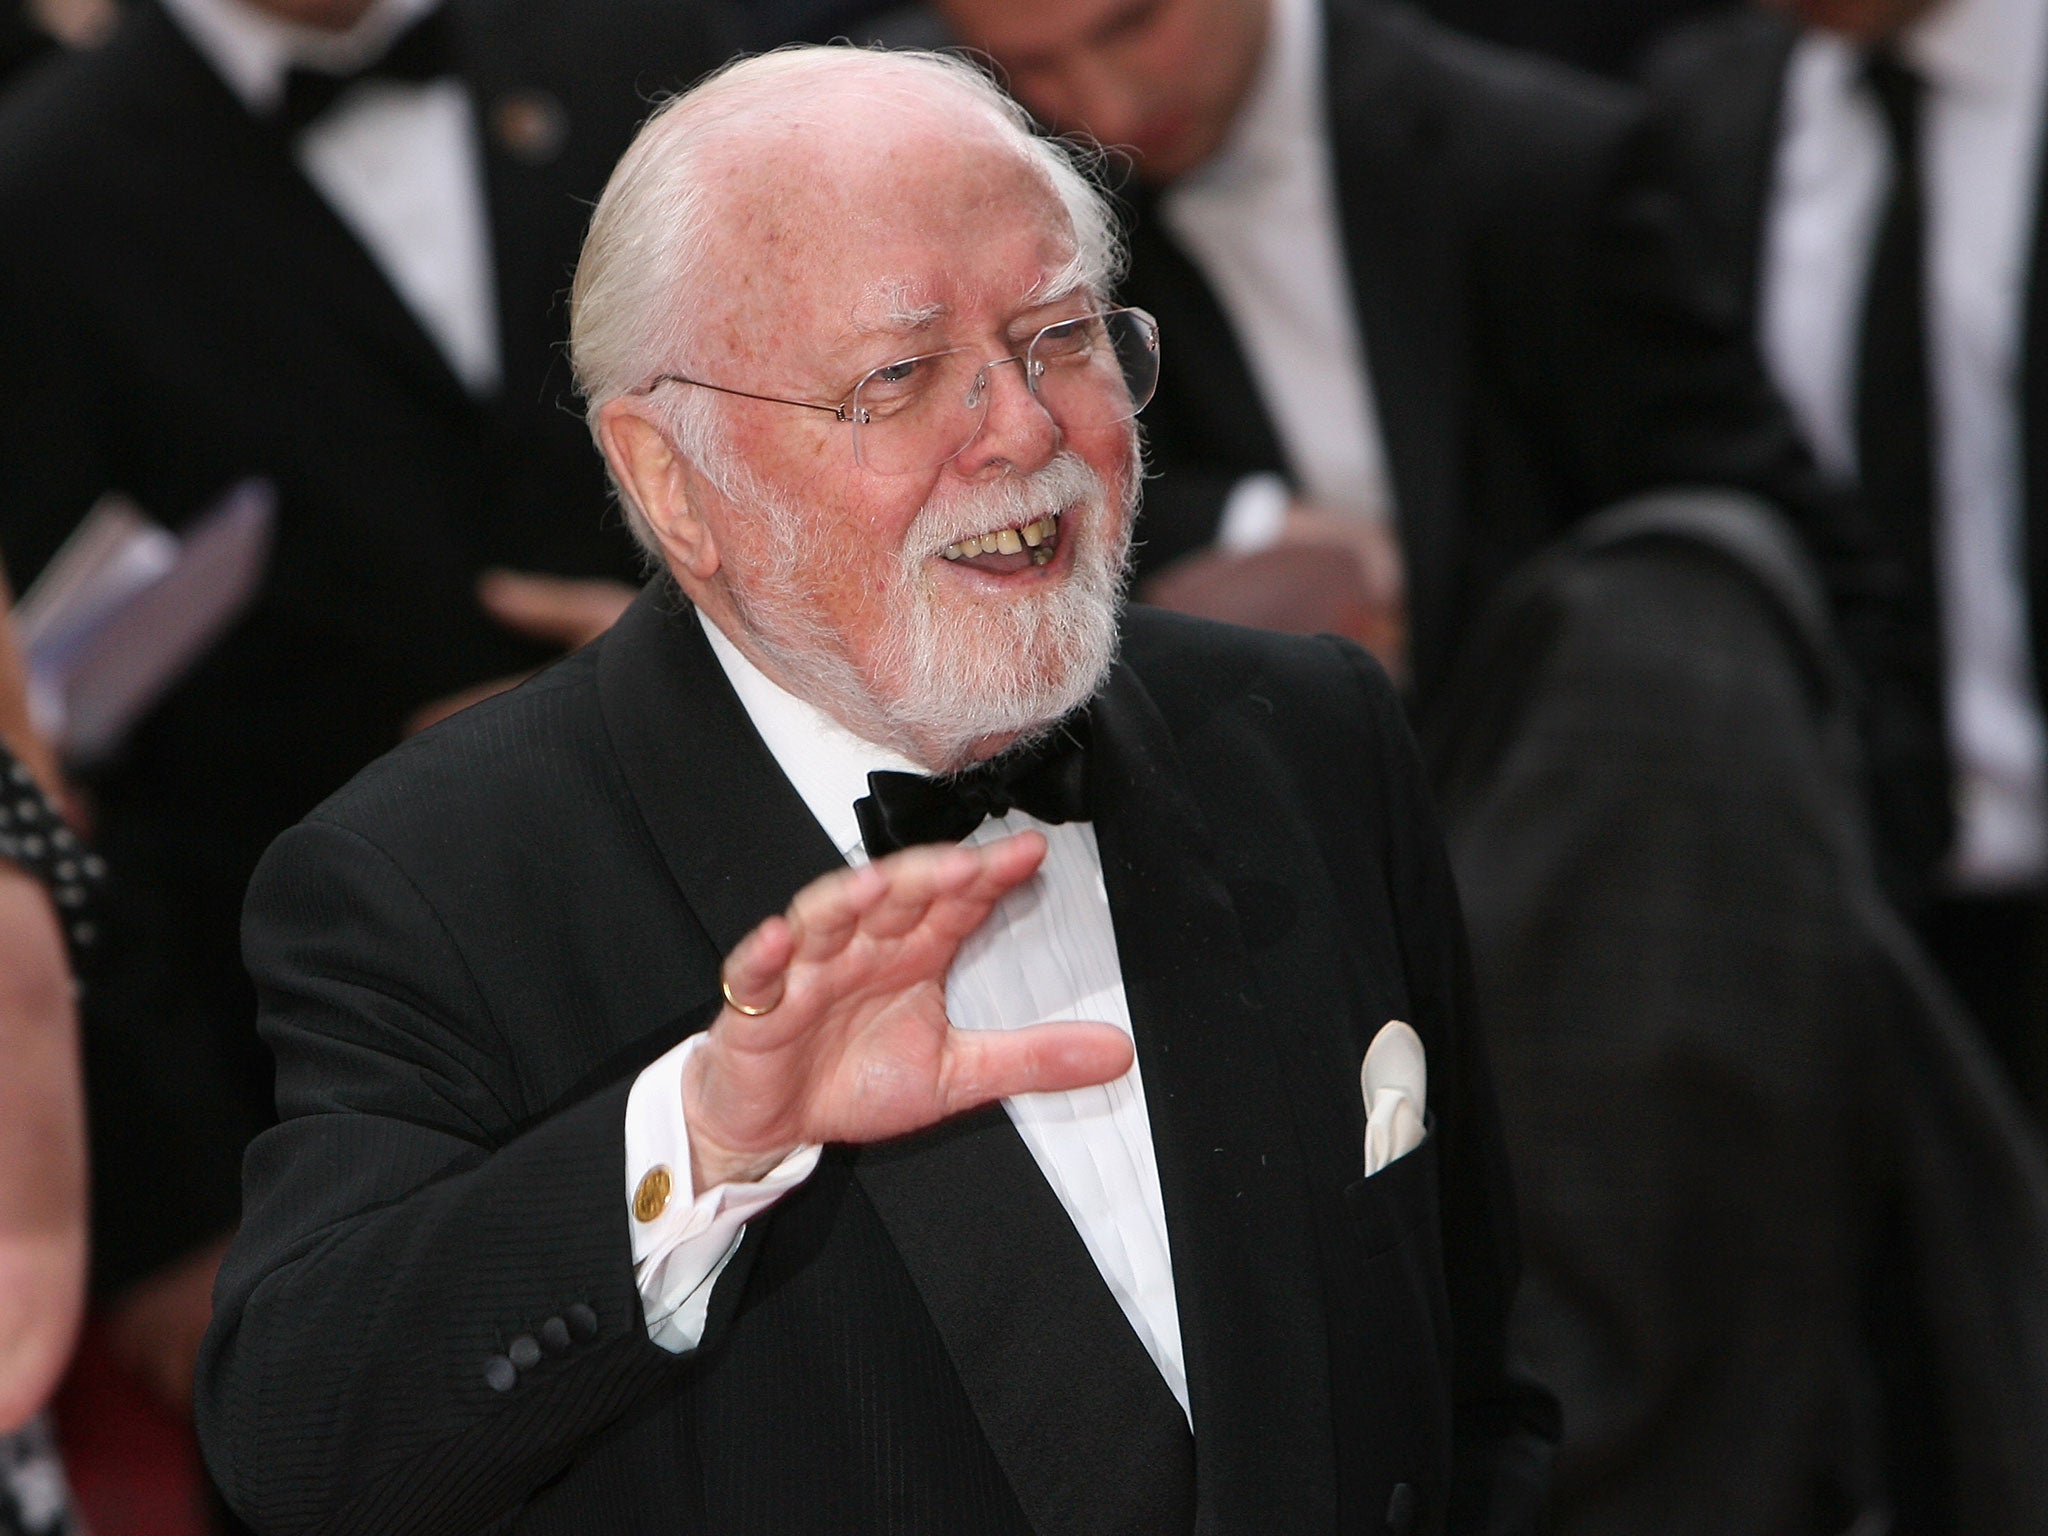 Lord Richard Attenborough attends the Galaxy British Book Awards held at the Grosvenor House Hotel in 2008